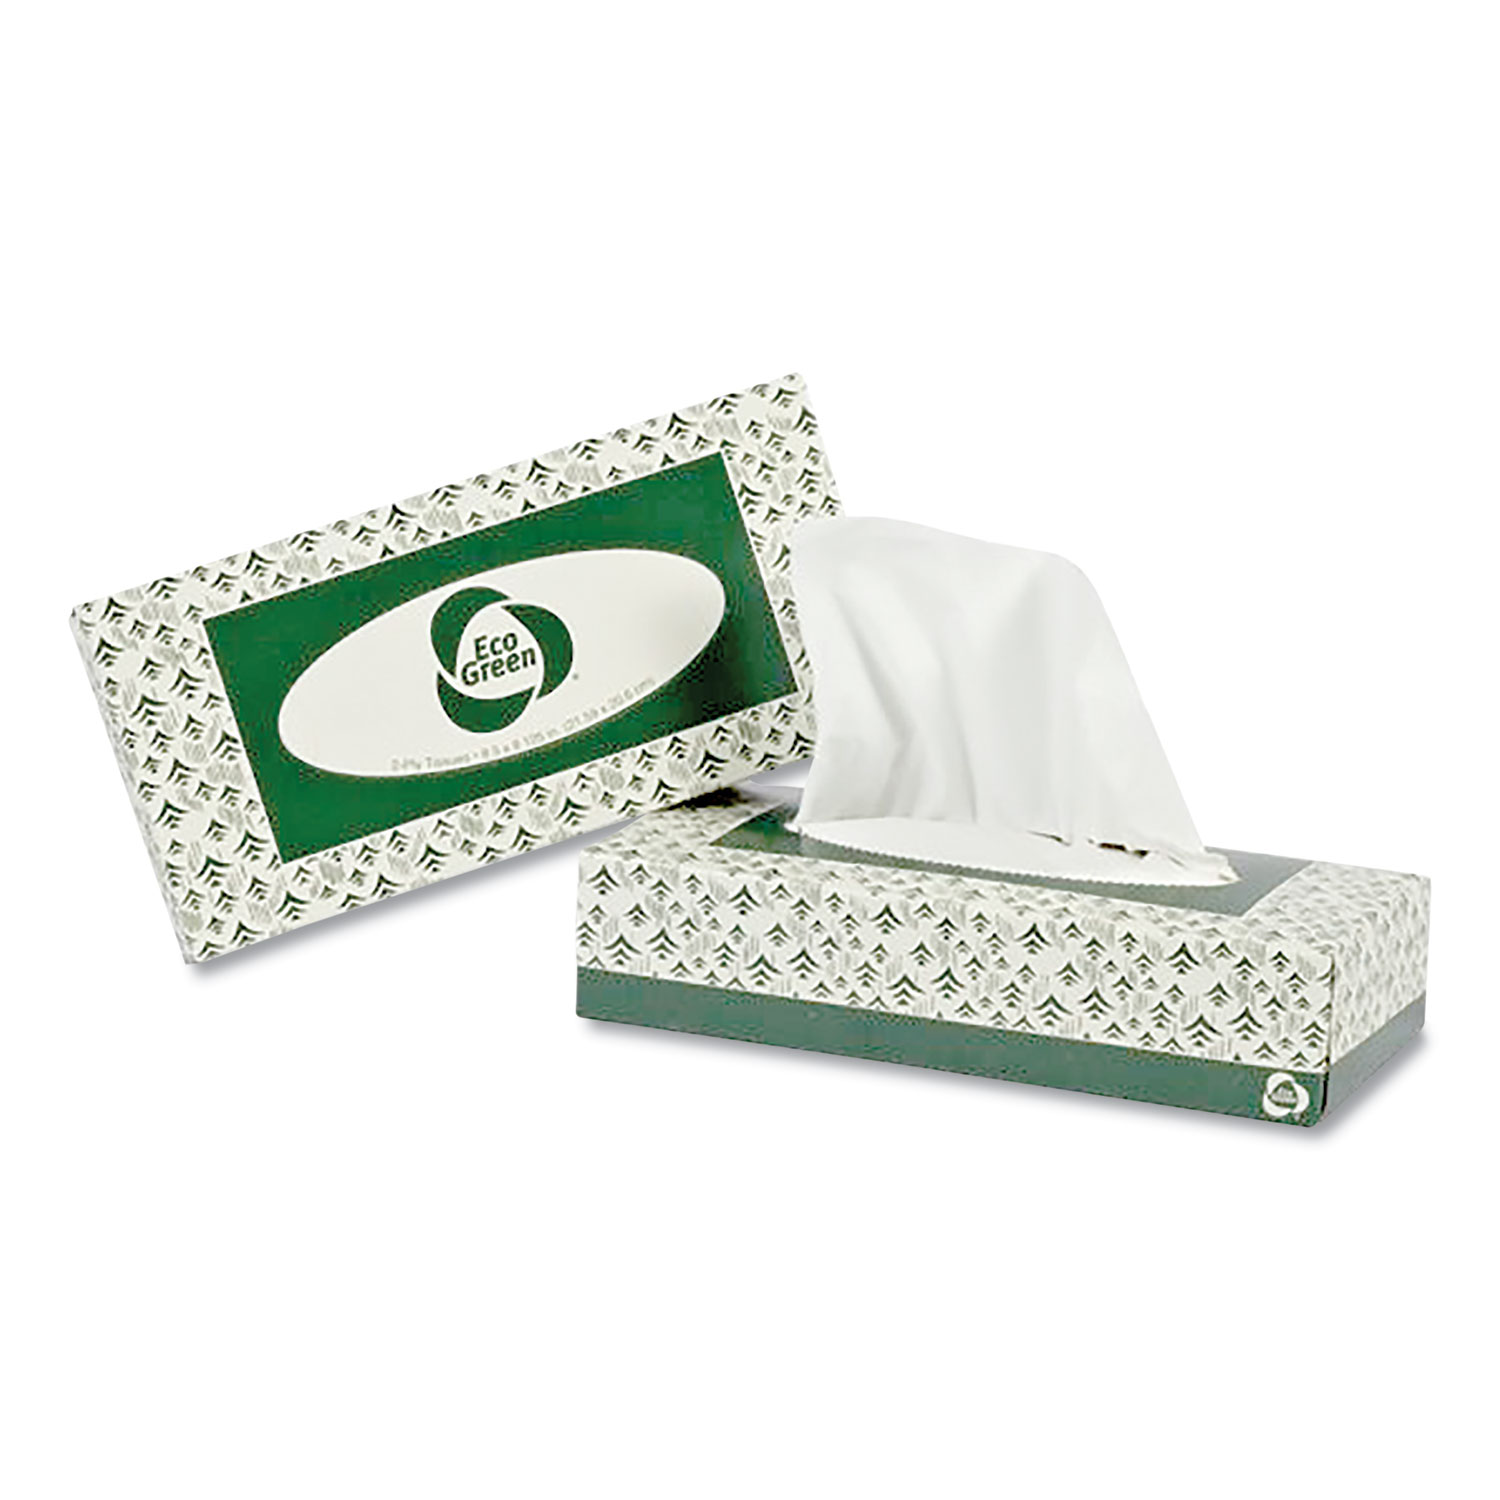 Eco Green Recycled Two-Ply Facial Tissue, White, 150 Sheets/box, 20 Boxes/carton